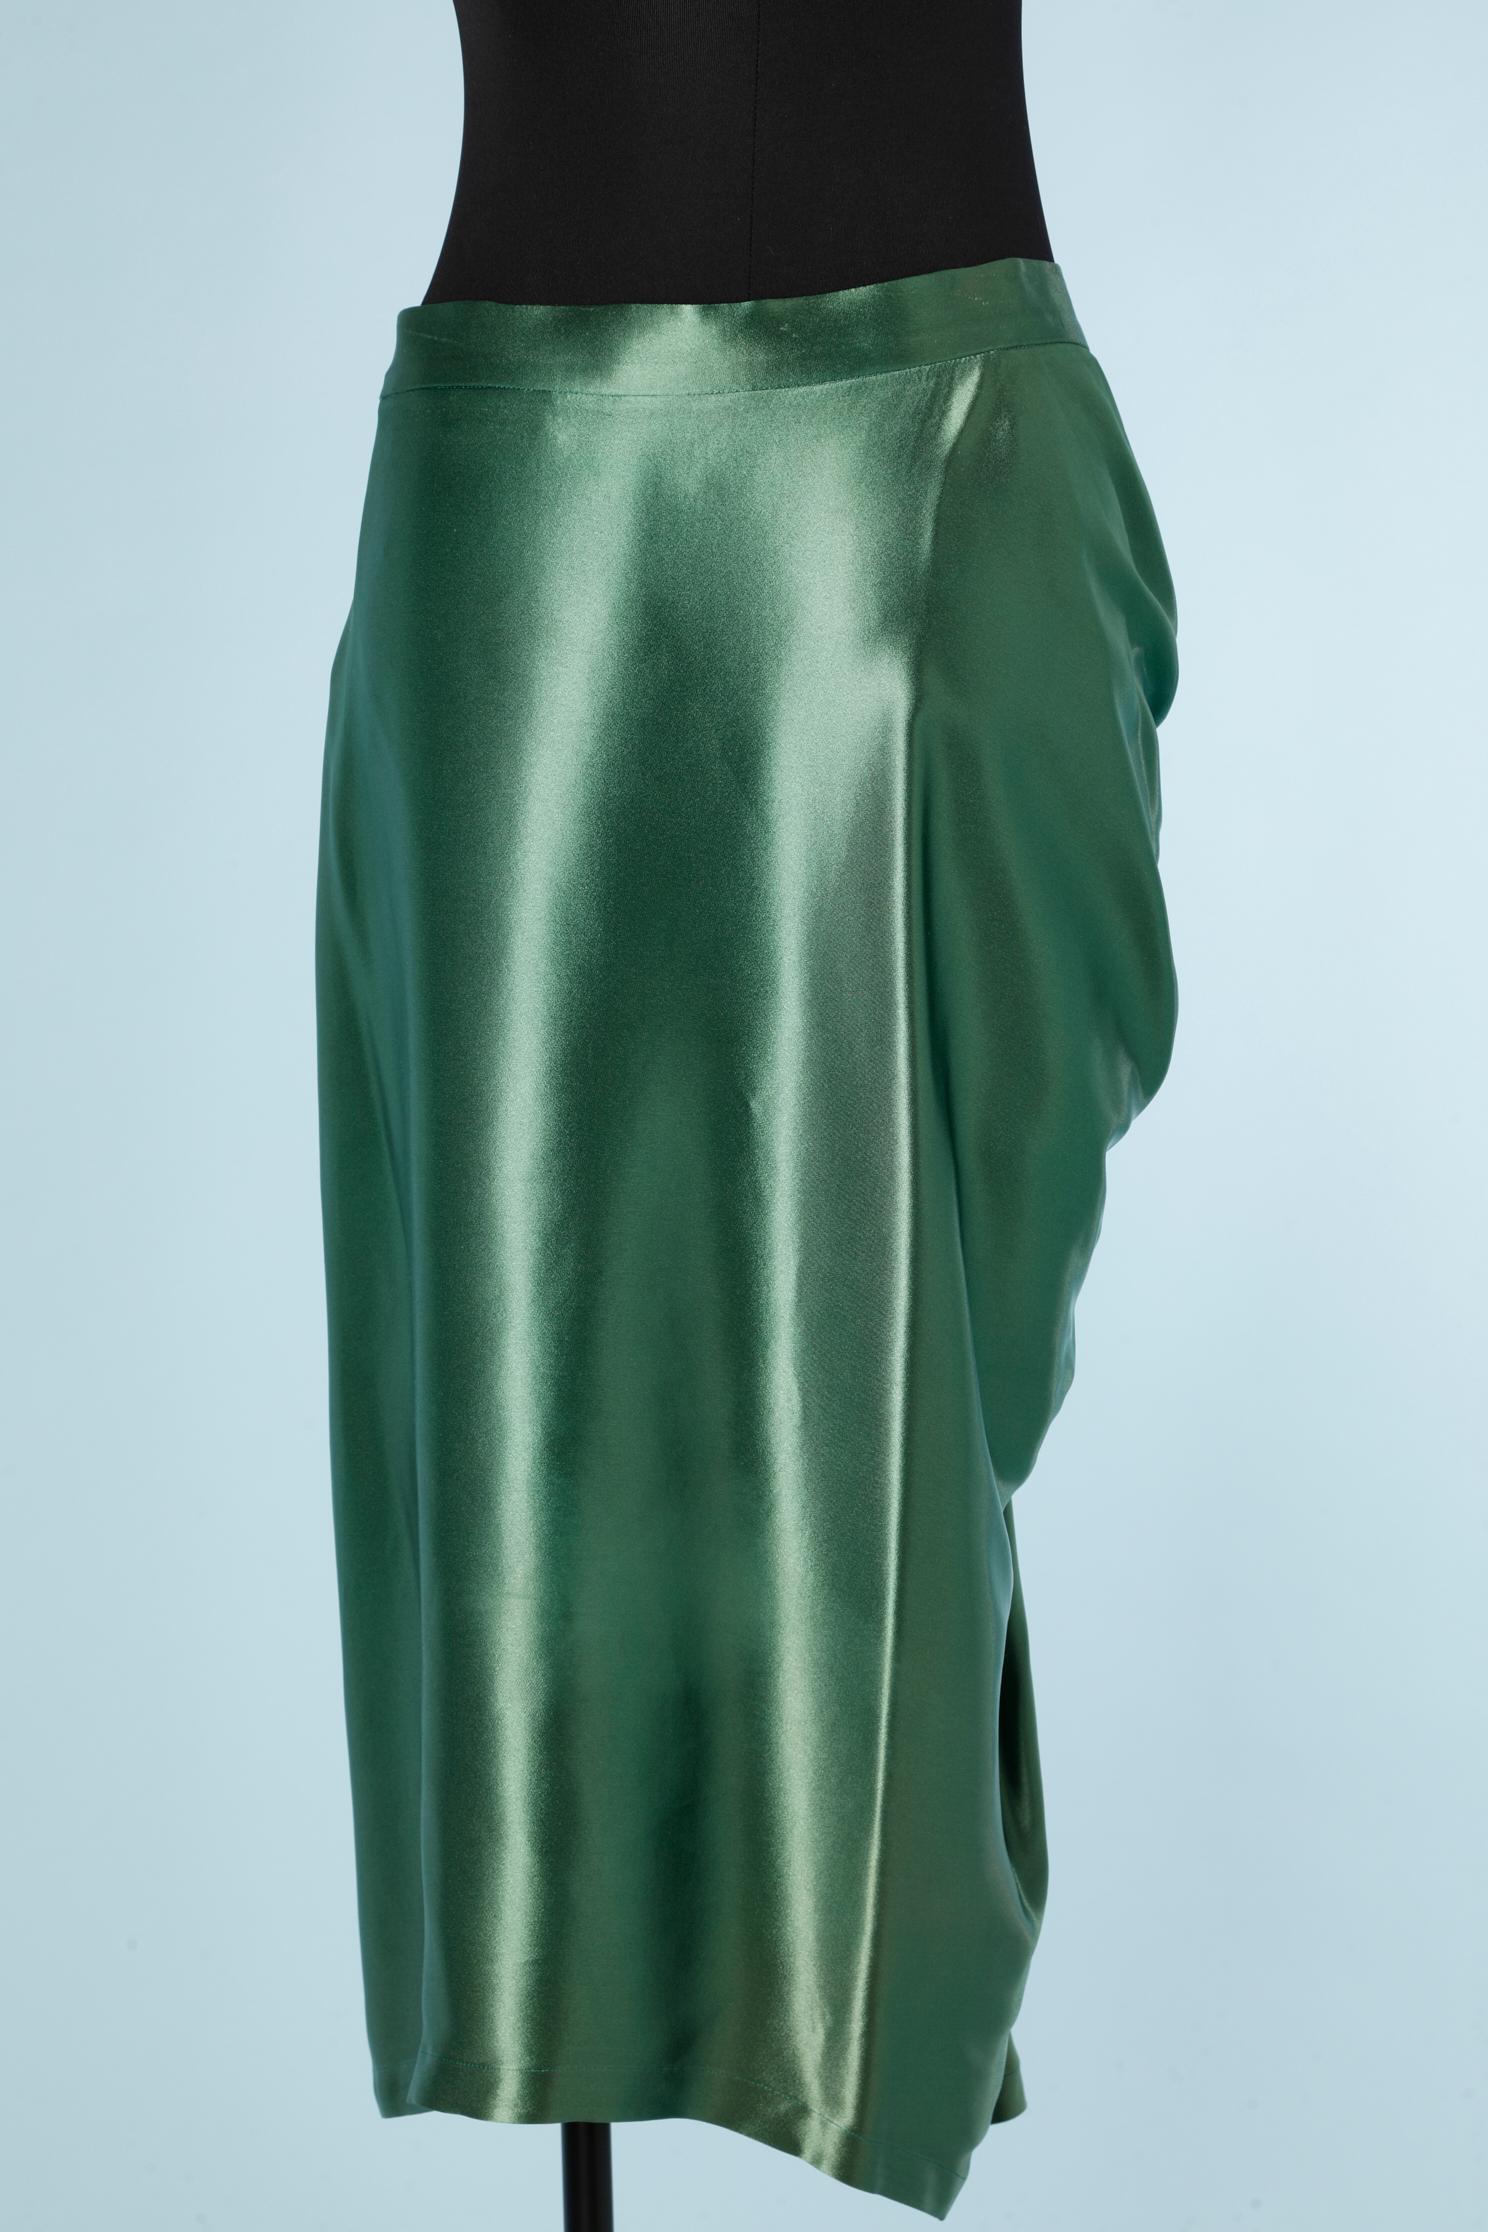 Wrap  and draped skirt in emerald silk satin Yves Saint Laurent Rive Gauche  In Good Condition For Sale In Saint-Ouen-Sur-Seine, FR